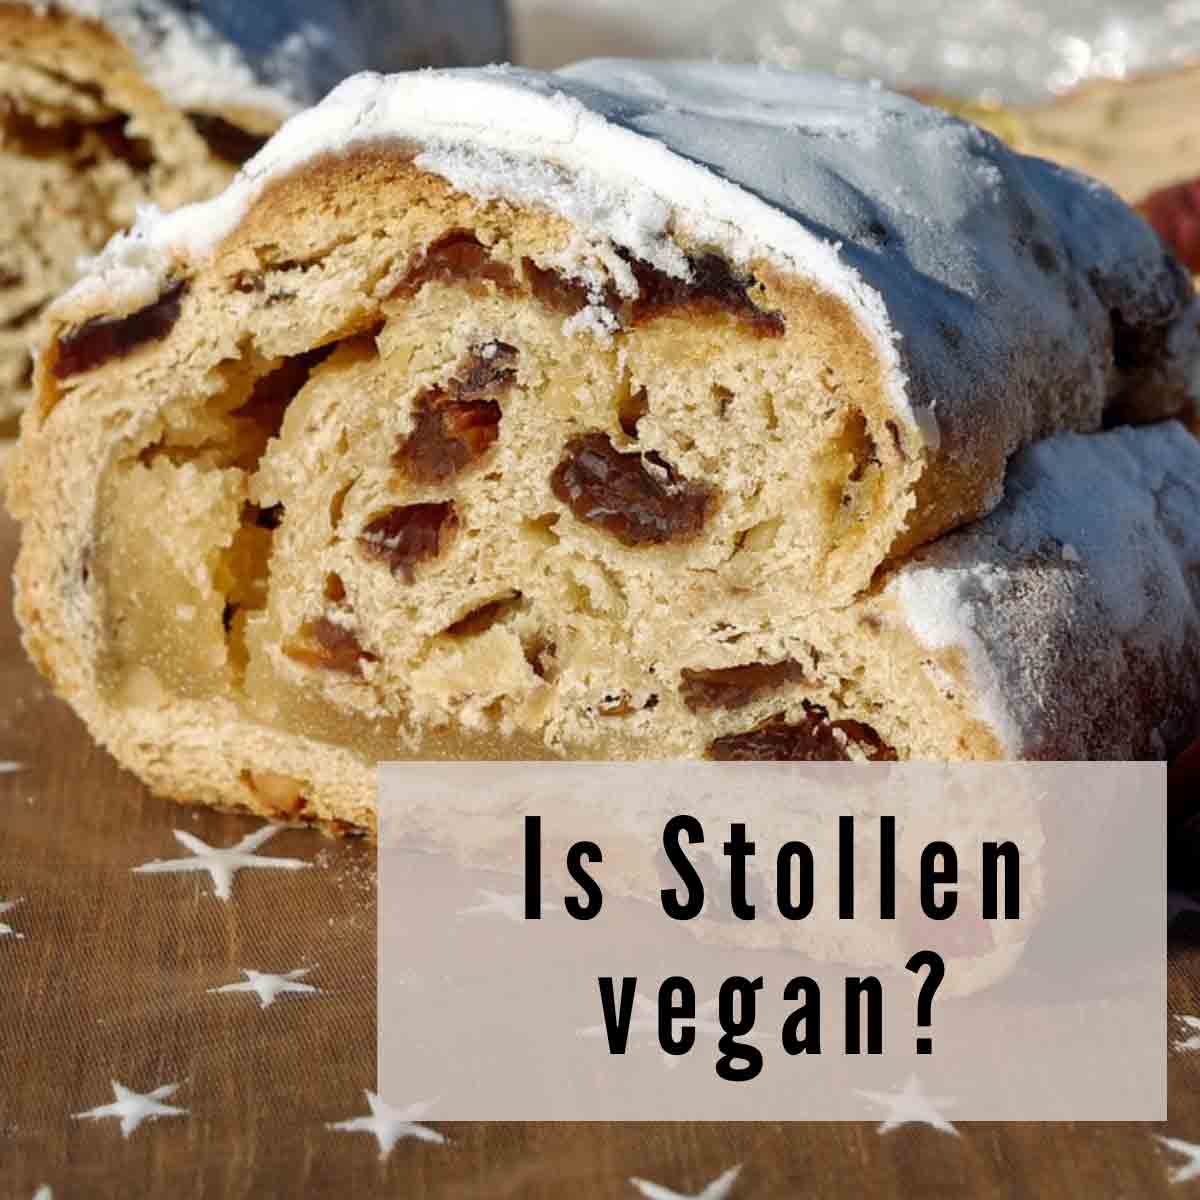 Picture Of Stollen With Tet Overlay That Reads Is Stollen Vegan